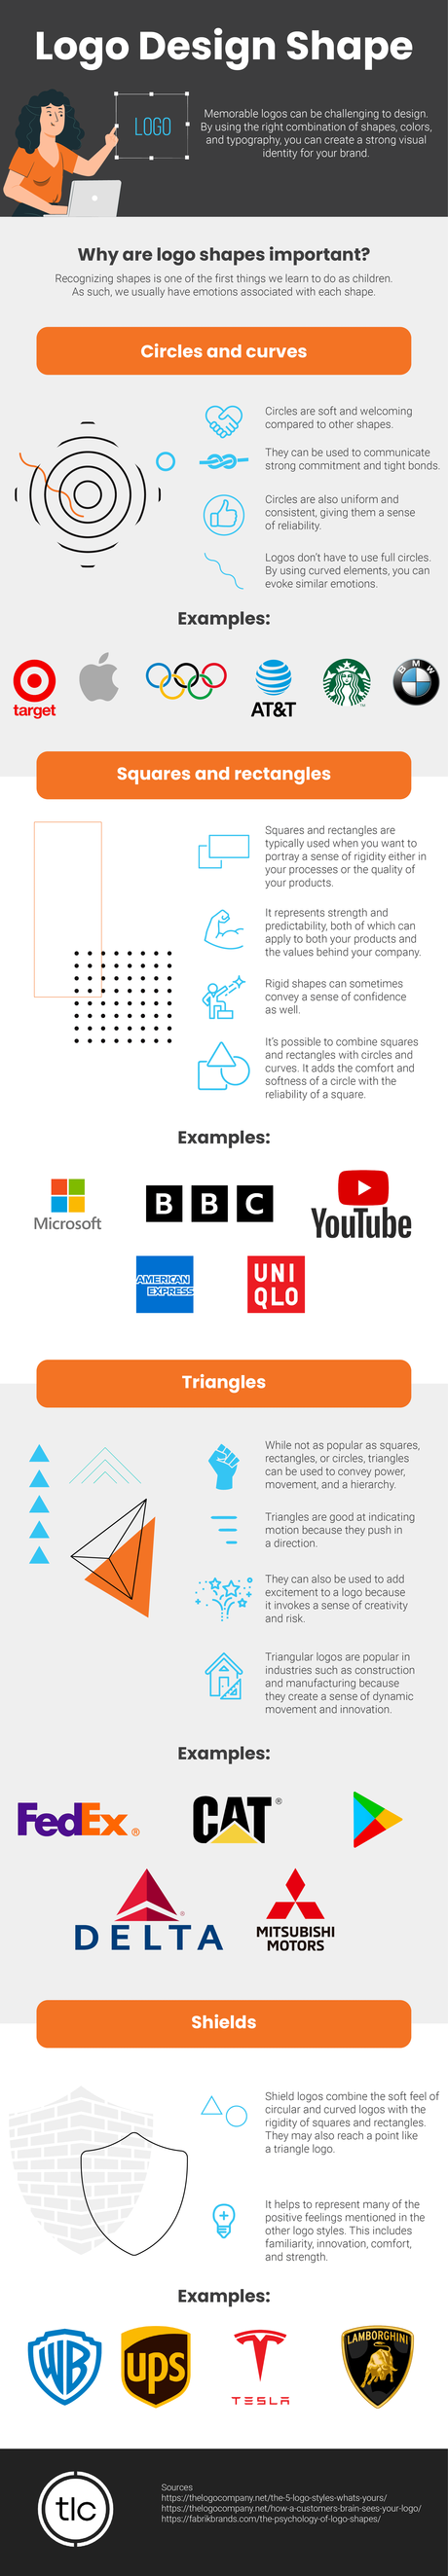 why logo shapes matter for your designs